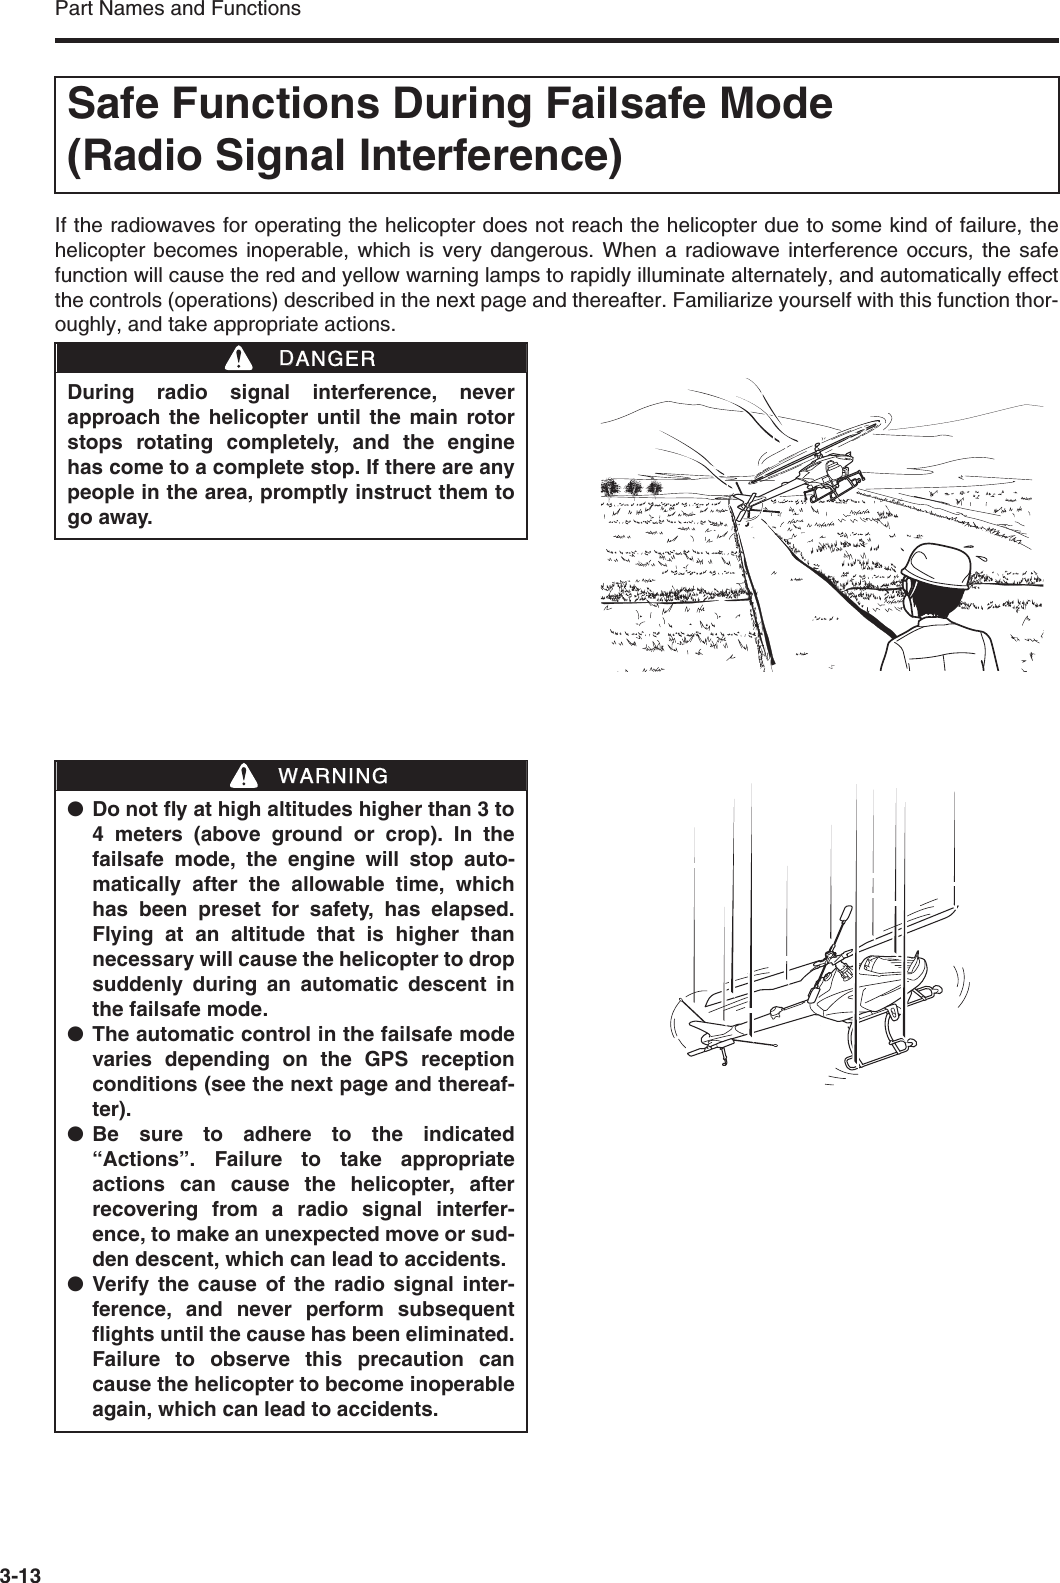 Part Names and Functions3-13If the radiowaves for operating the helicopter does not reach the helicopter due to some kind of failure, thehelicopter becomes inoperable, which is very dangerous. When a radiowave interference occurs, the safefunction will cause the red and yellow warning lamps to rapidly illuminate alternately, and automatically effectthe controls (operations) described in the next page and thereafter. Familiarize yourself with this function thor-oughly, and take appropriate actions.Safe Functions During Failsafe Mode (Radio Signal Interference)During radio signal interference, neverapproach the helicopter until the main rotorstops rotating completely, and the enginehas come to a complete stop. If there are anypeople in the area, promptly instruct them togo away.DDANGER●Do not fly at high altitudes higher than 3 to4 meters (above ground or crop). In thefailsafe mode, the engine will stop auto-matically after the allowable time, whichhas been preset for safety, has elapsed.Flying at an altitude that is higher thannecessary will cause the helicopter to dropsuddenly during an automatic descent inthe failsafe mode.●The automatic control in the failsafe modevaries depending on the GPS receptionconditions (see the next page and thereaf-ter).●Be sure to adhere to the indicated“Actions”. Failure to take appropriateactions can cause the helicopter, afterrecovering from a radio signal interfer-ence, to make an unexpected move or sud-den descent, which can lead to accidents.●Verify the cause of the radio signal inter-ference, and never perform subsequentflights until the cause has been eliminated.Failure to observe this precaution cancause the helicopter to become inoperableagain, which can lead to accidents.WWARNING